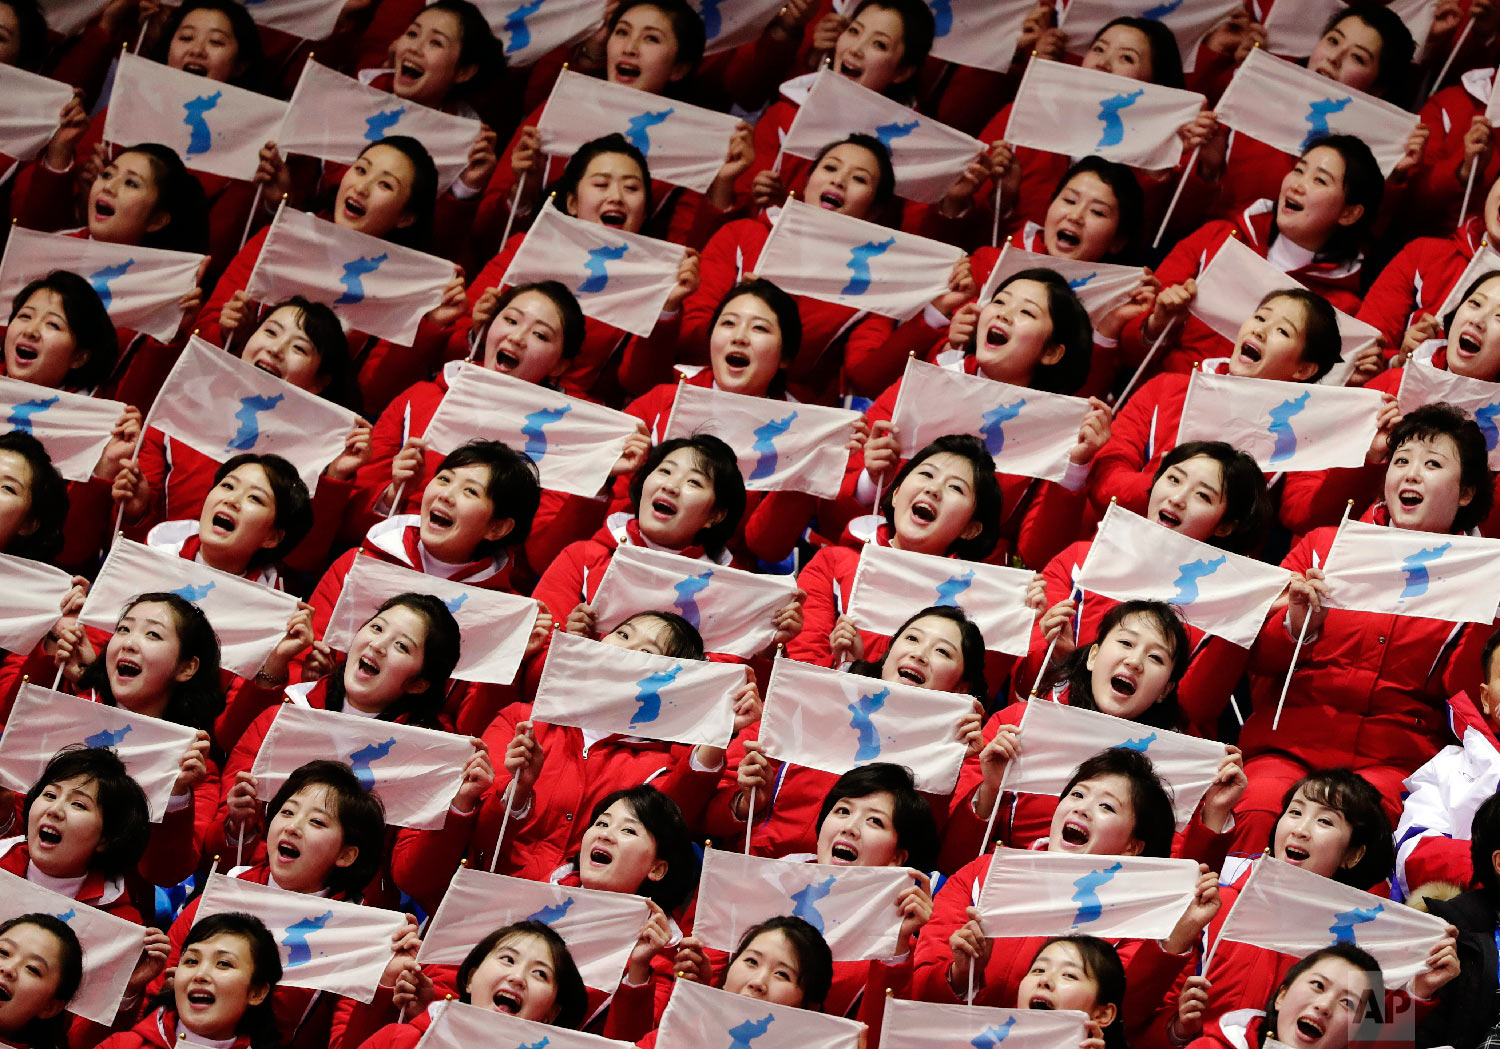  North Korean supporters hold up Korean unification flags during the ladies' 500 meters short-track speedskating at the 2018 Winter Olympics in Gangneung, South Korea, on Feb. 10, 2018. (AP Photo/Julie Jacobson) 